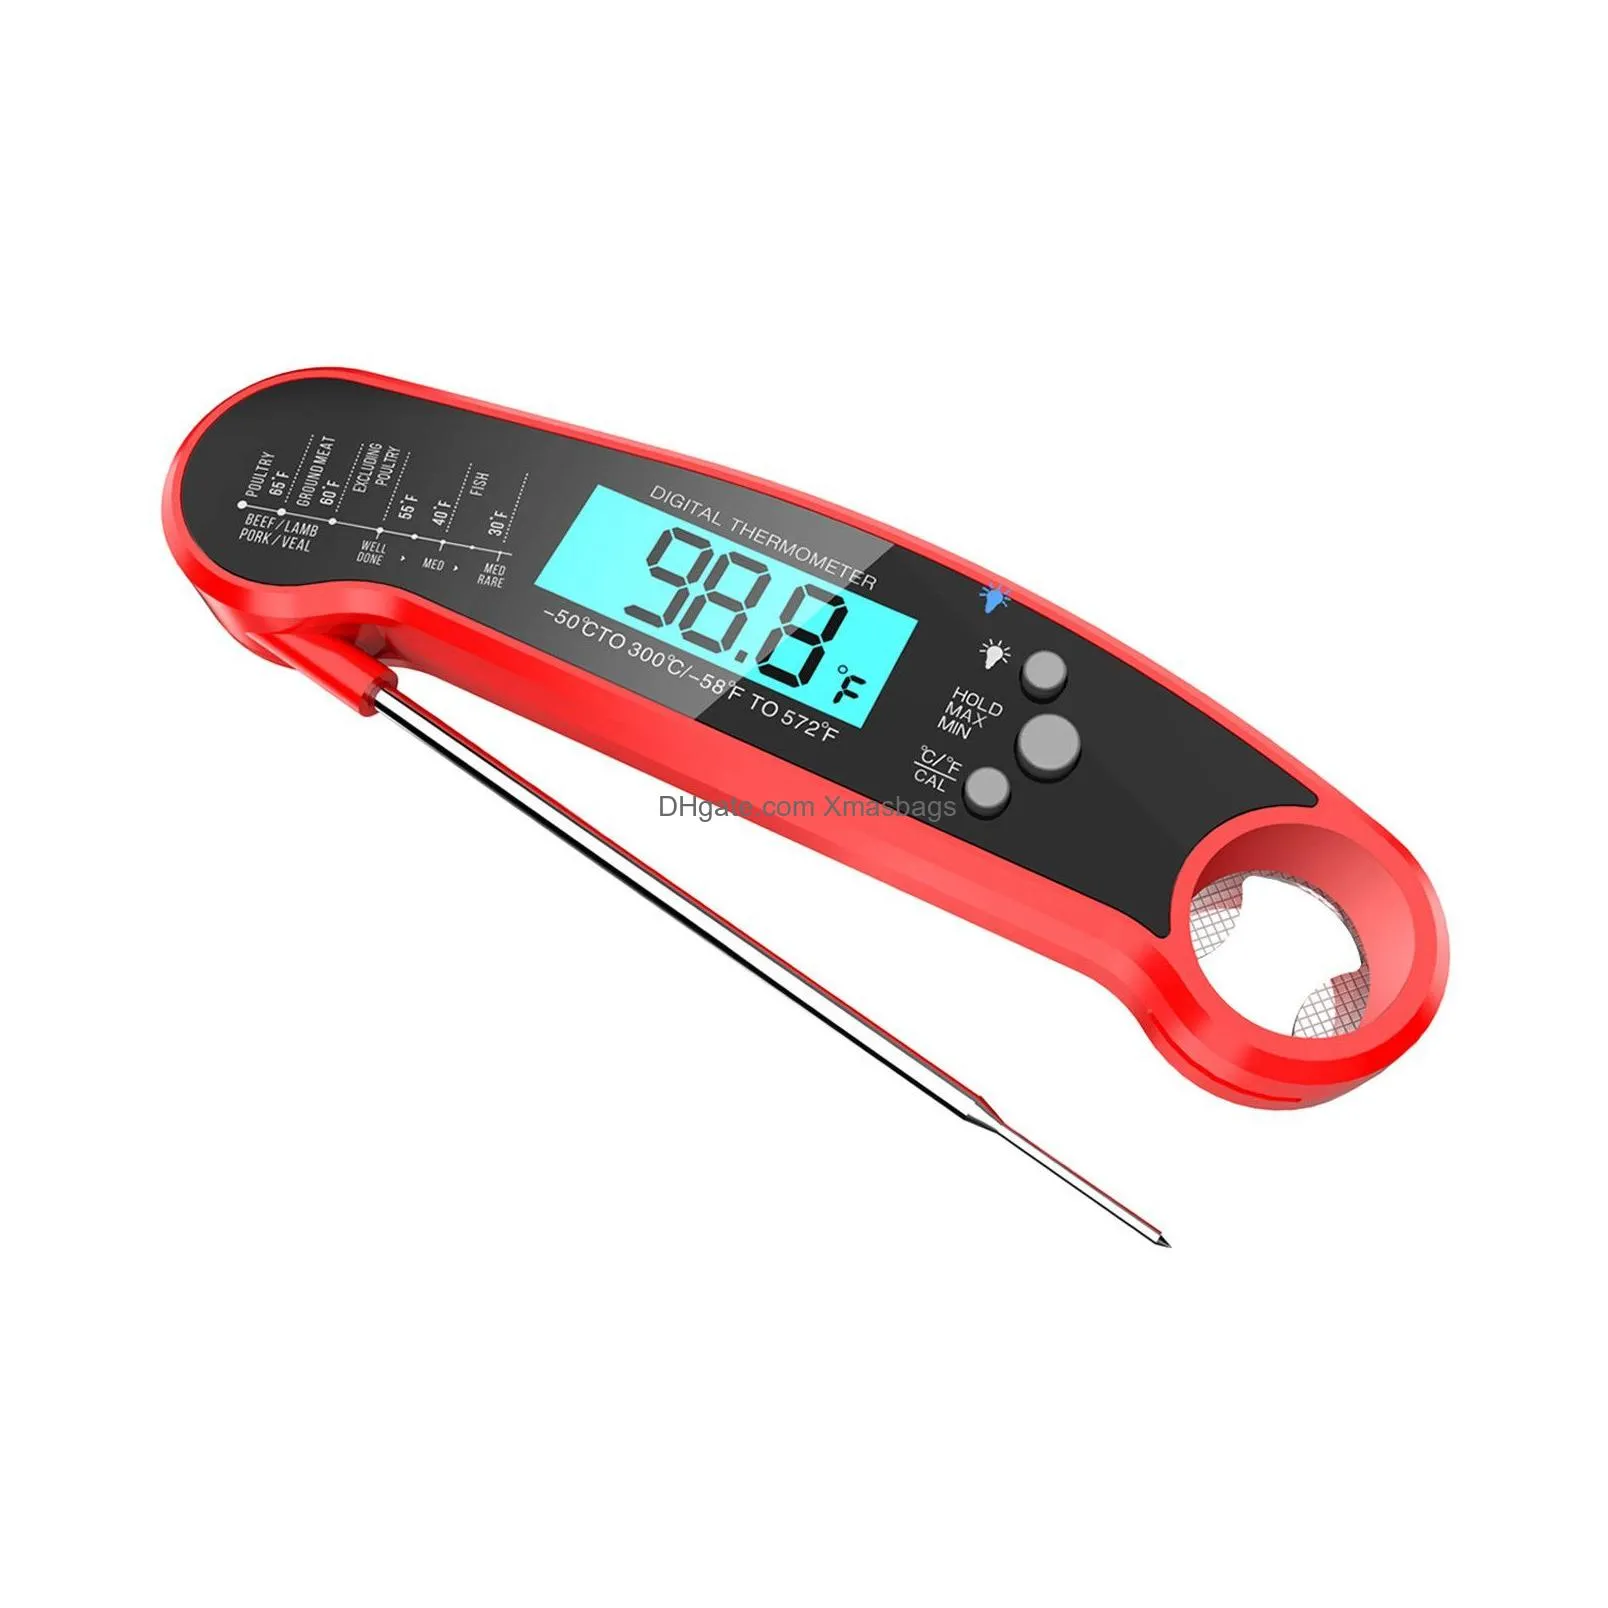 bbq digital kitchen food thermometer meat cake candy fry grill dinning household cooking temperature gauge oven thermometer tool